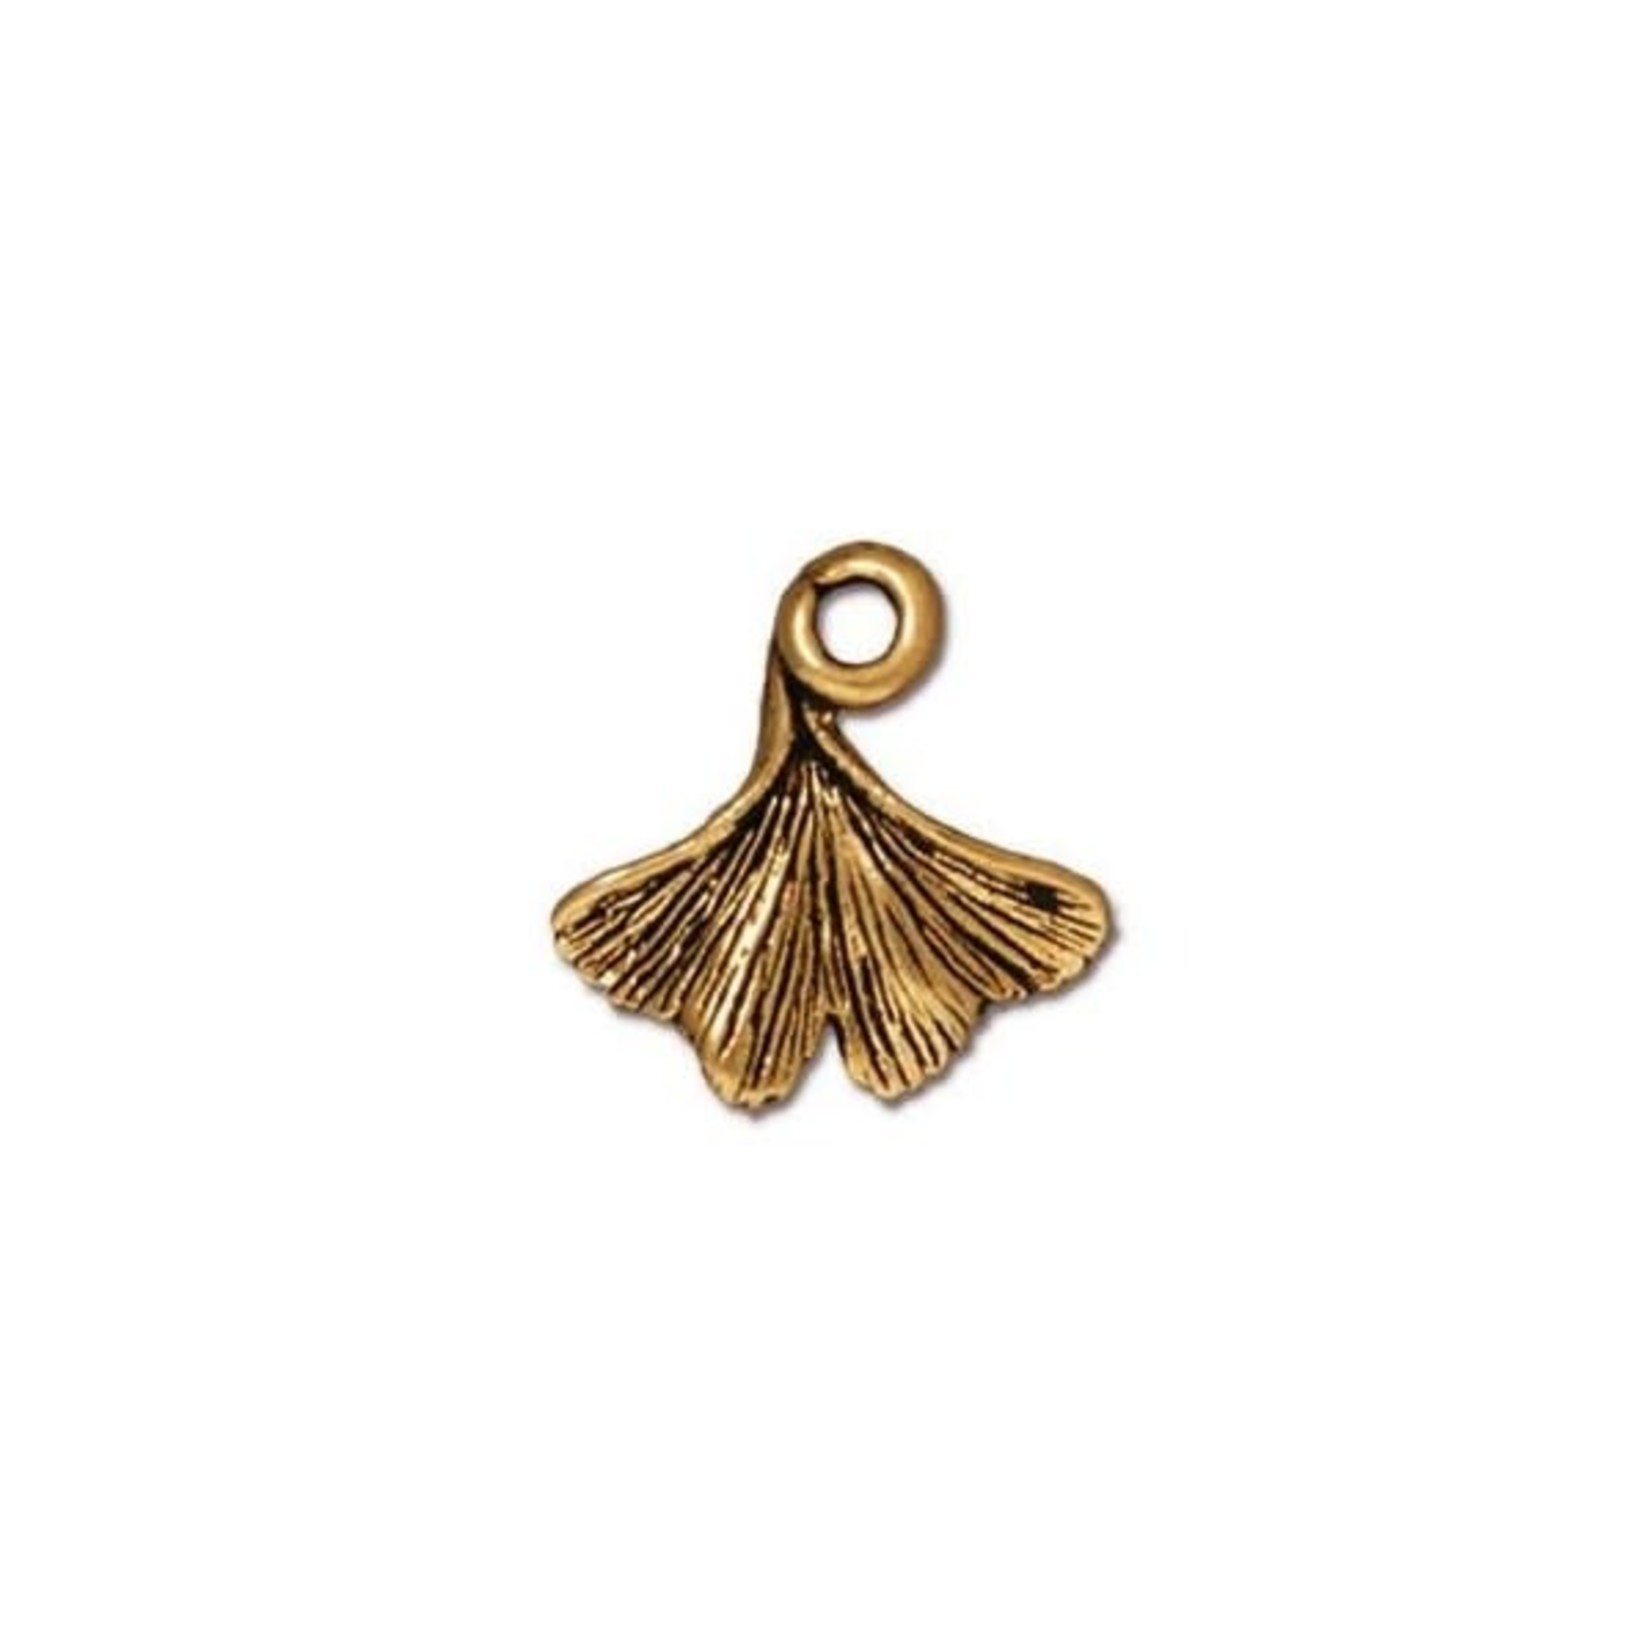 TierraCast Ginkgo Leaf - Antique Gold Plated Charm